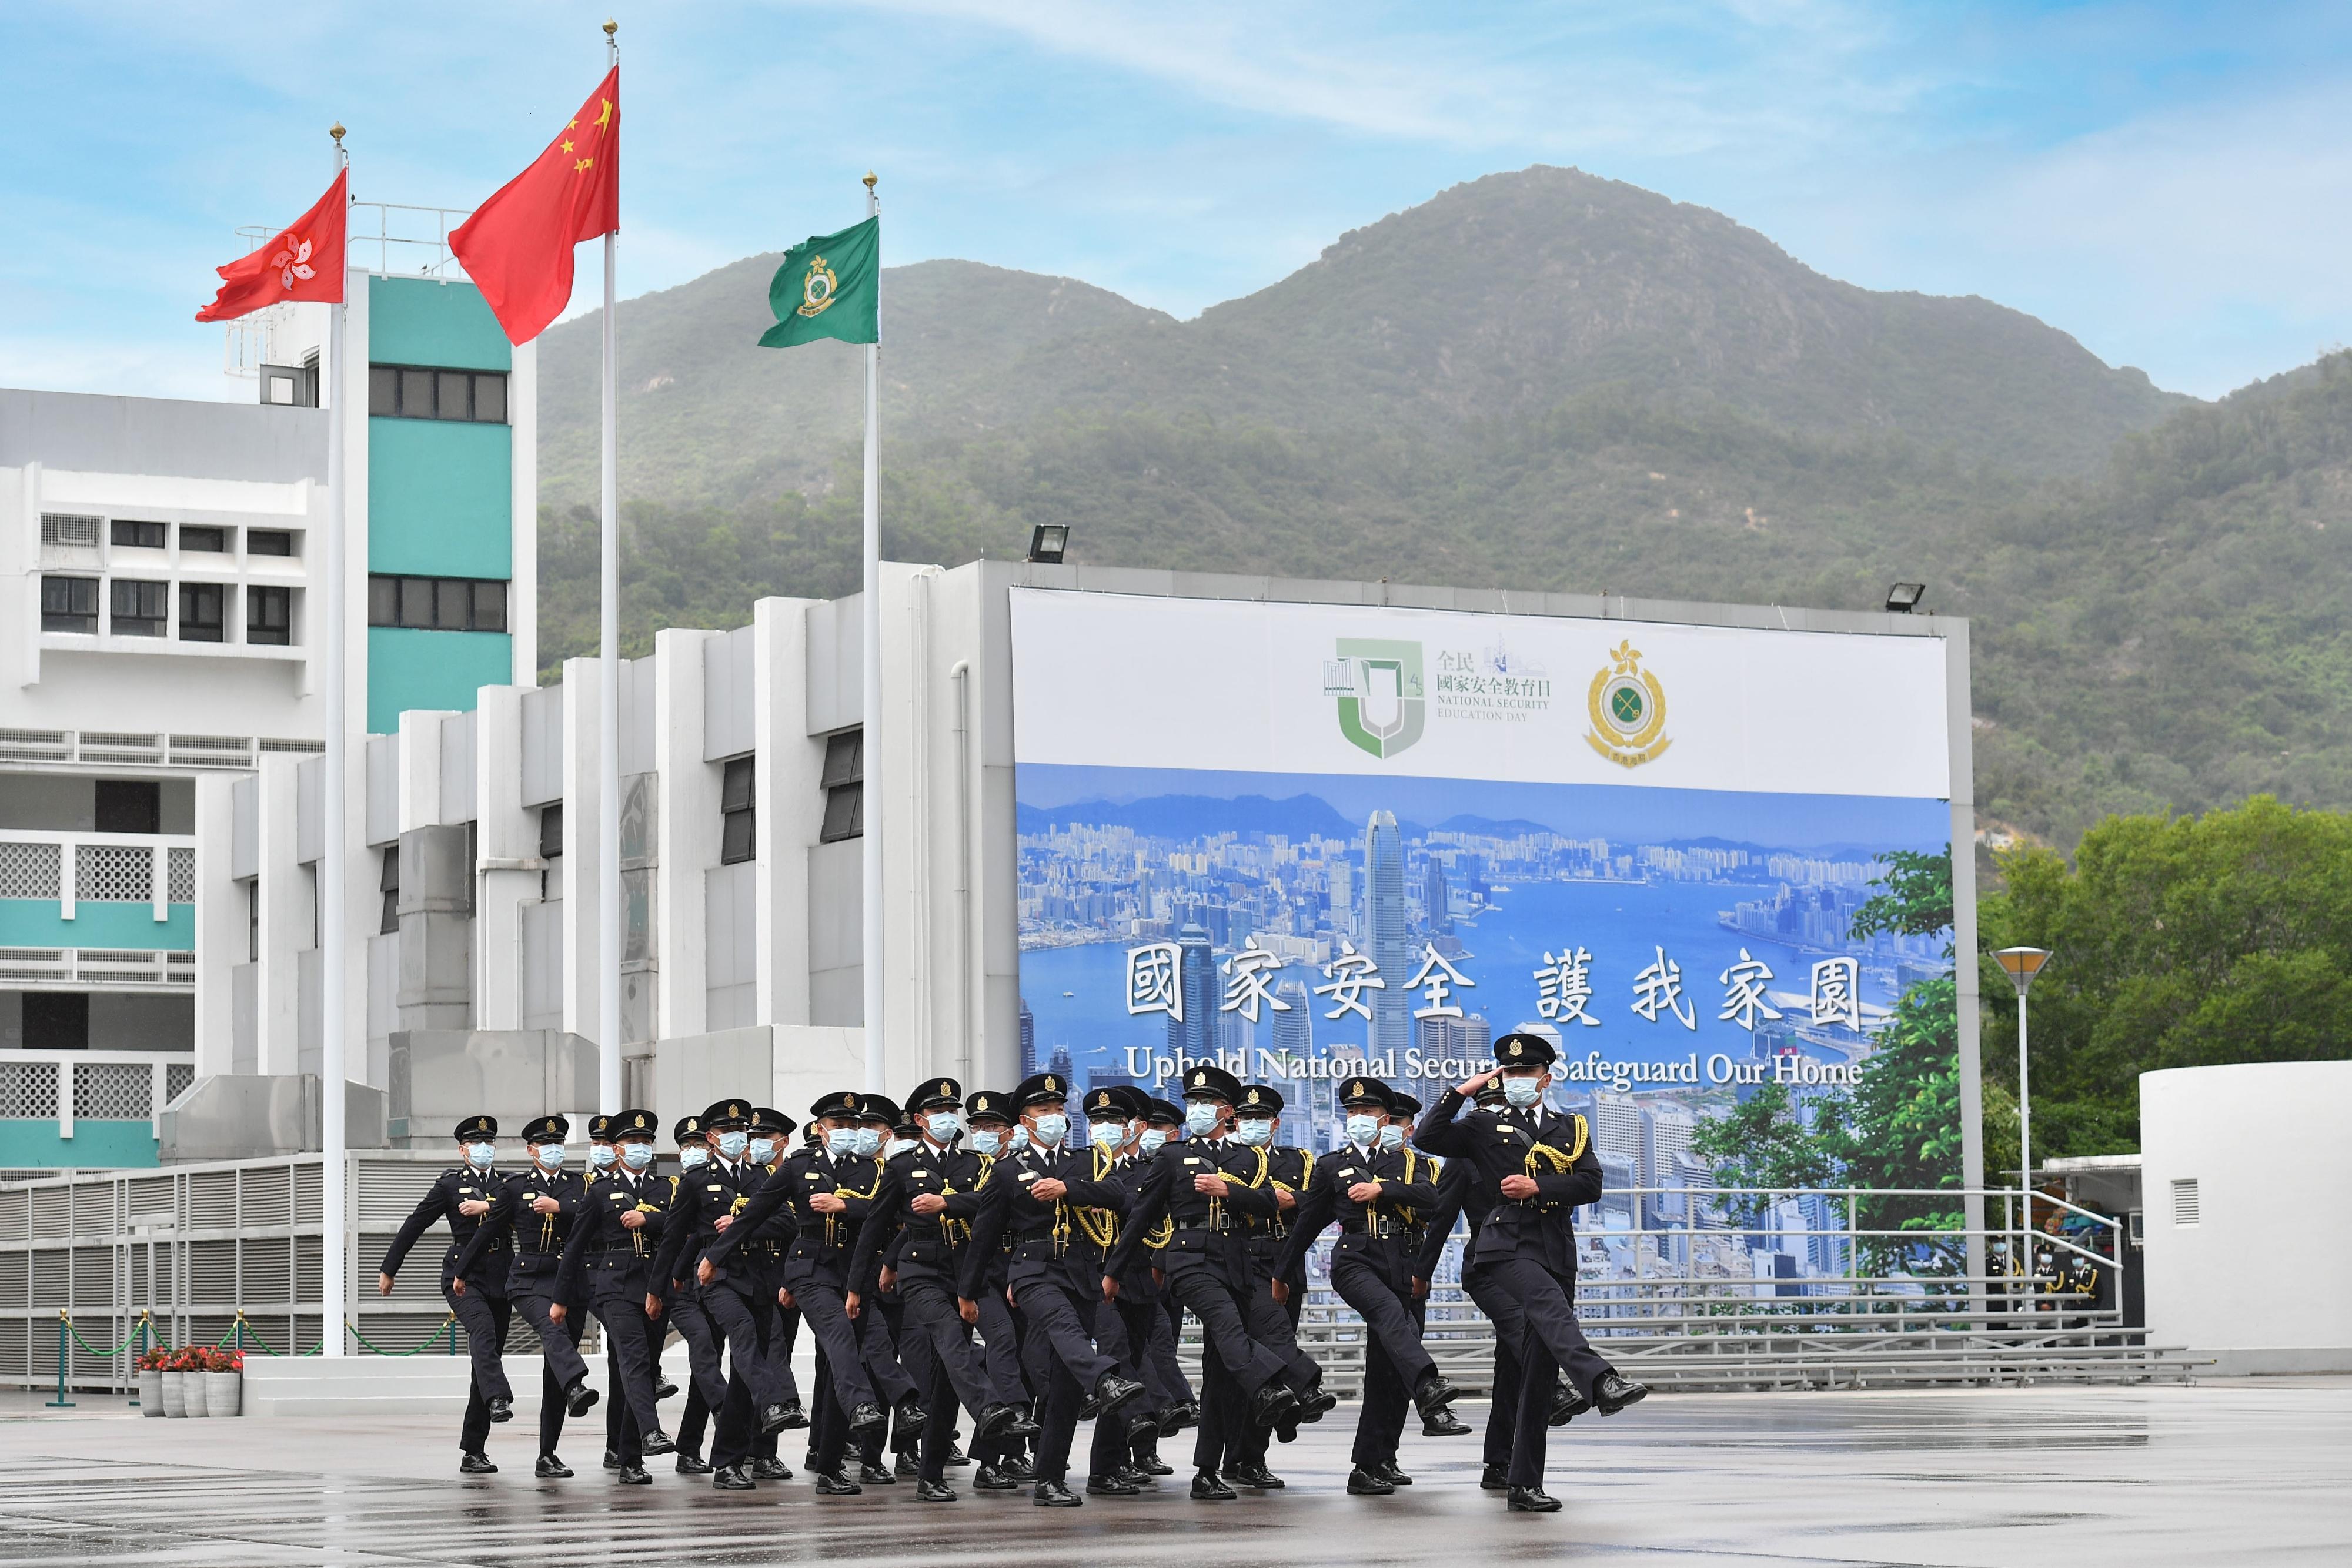 Hong Kong Customs has fully adopted the Chinese-style foot drill from today (May 4). All service members are required to adopt the protocols of the Chinese-style foot drill for ceremonial events, passing-out parades and other occasions while in uniform. Photo shows Customs officers performing the Chinese-style foot drill.